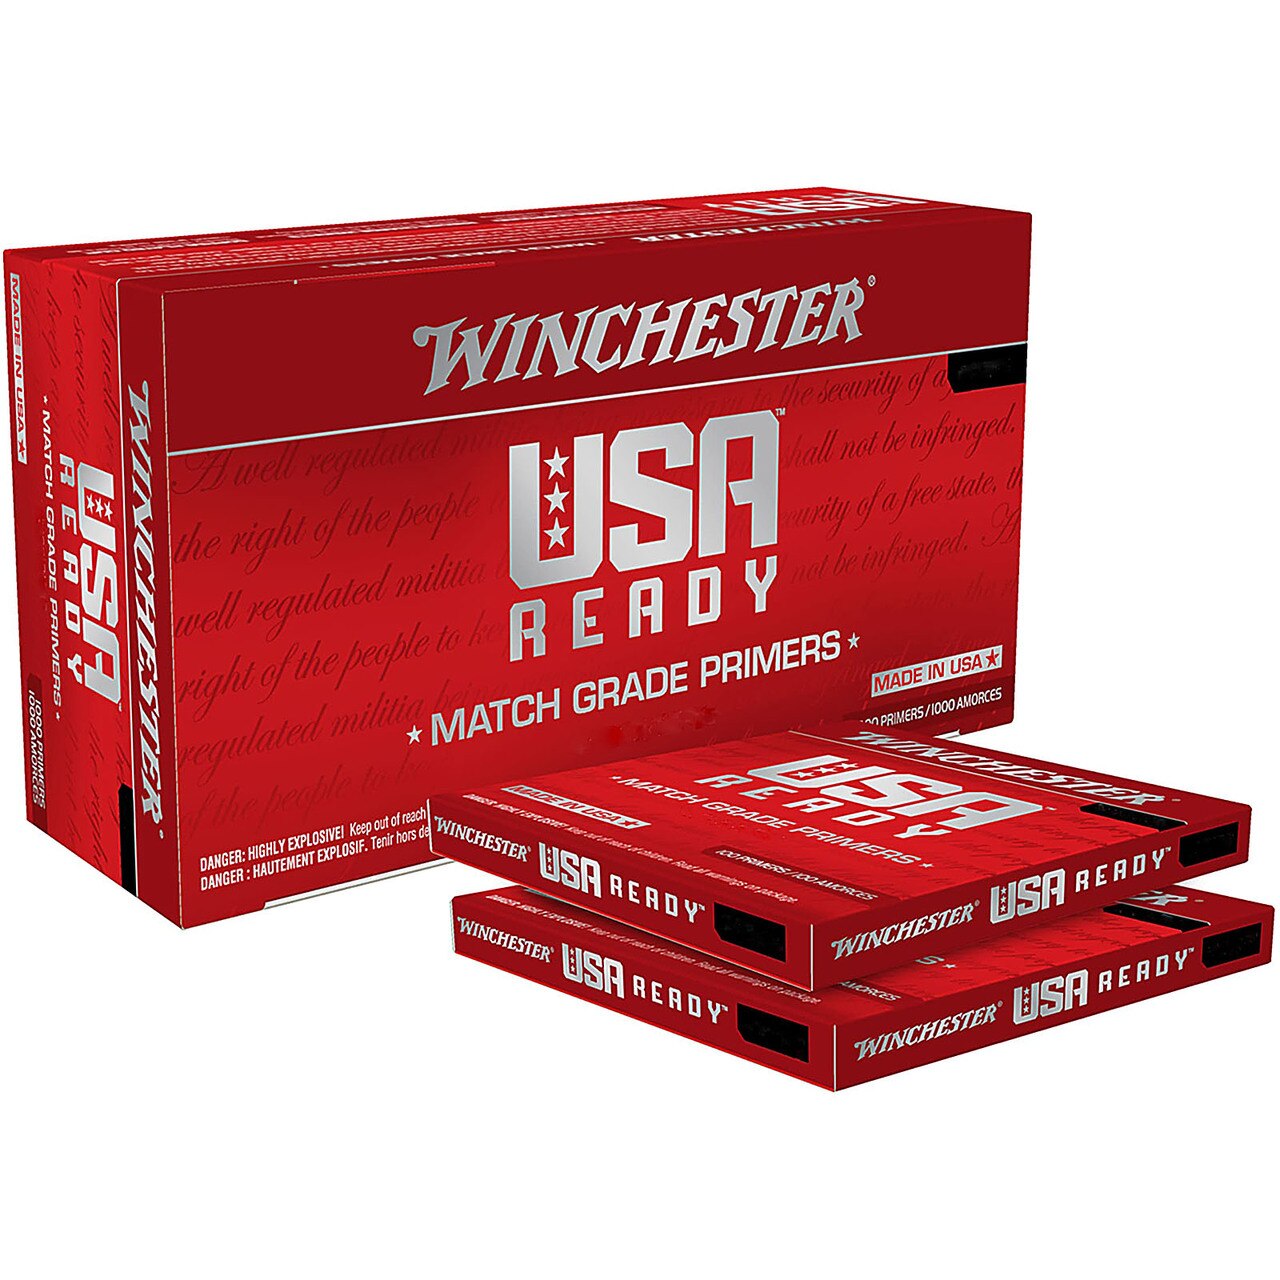 Winchester USA Ready Large Rifle Match Primers